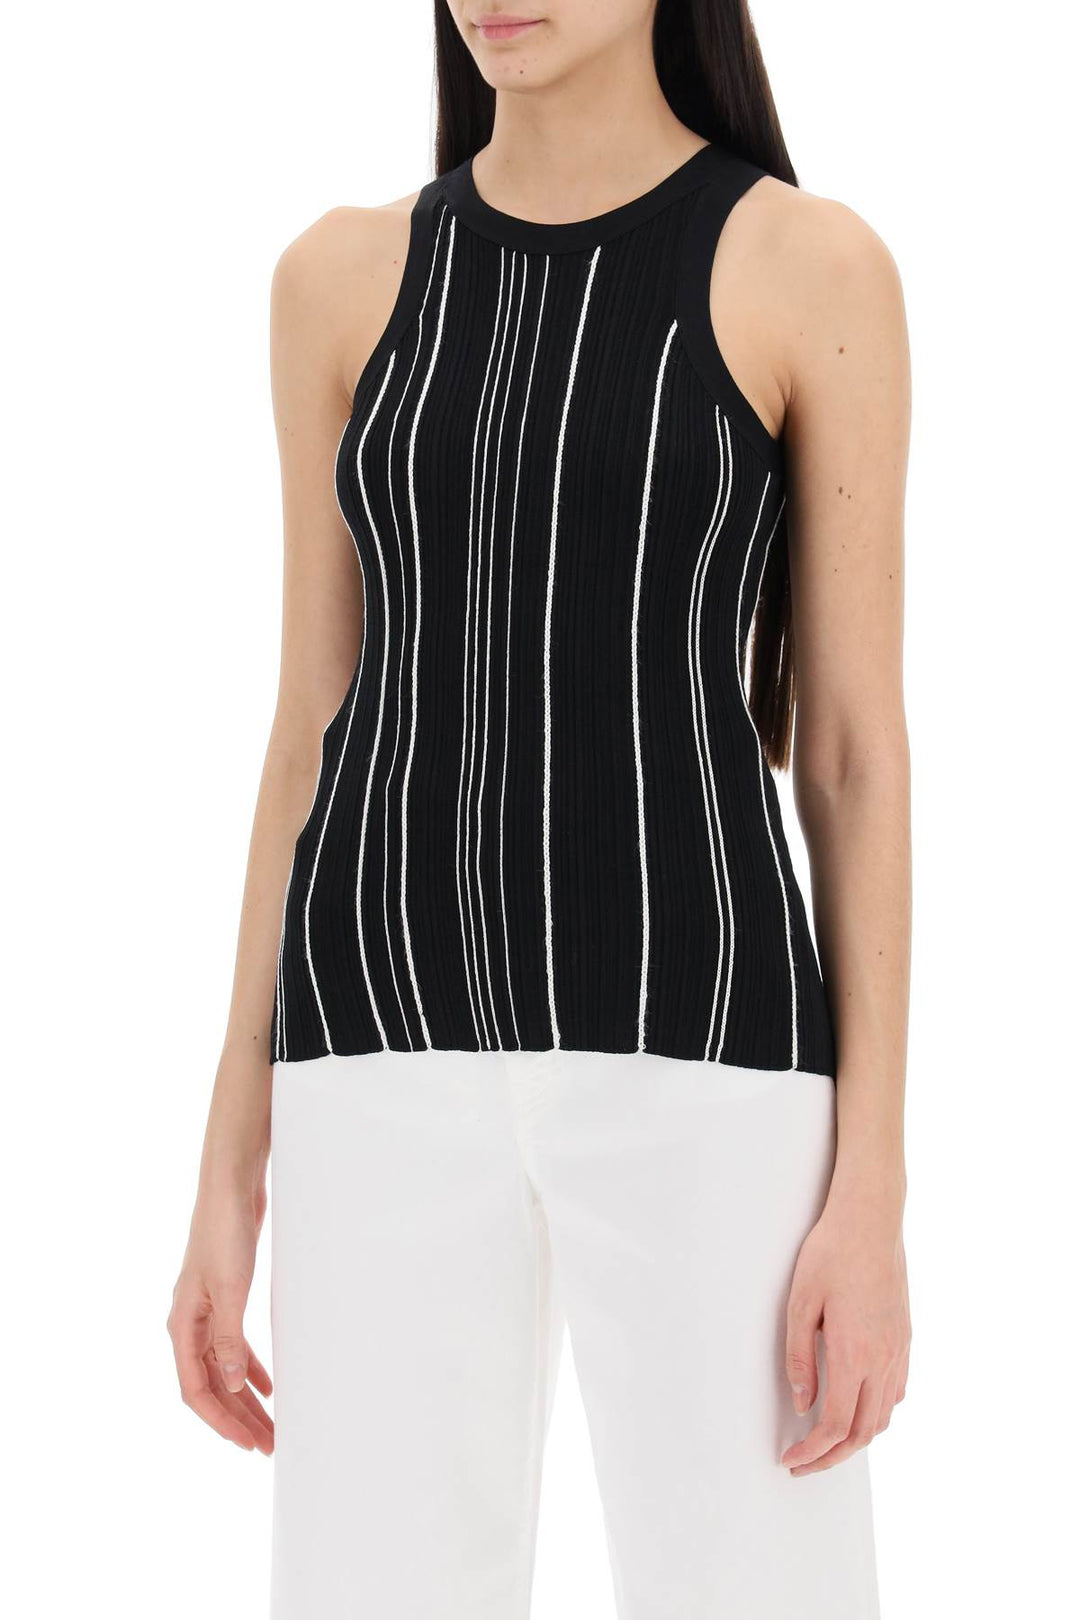 Toteme Ribbed Knit Tank Top With Spaghetti   Nero